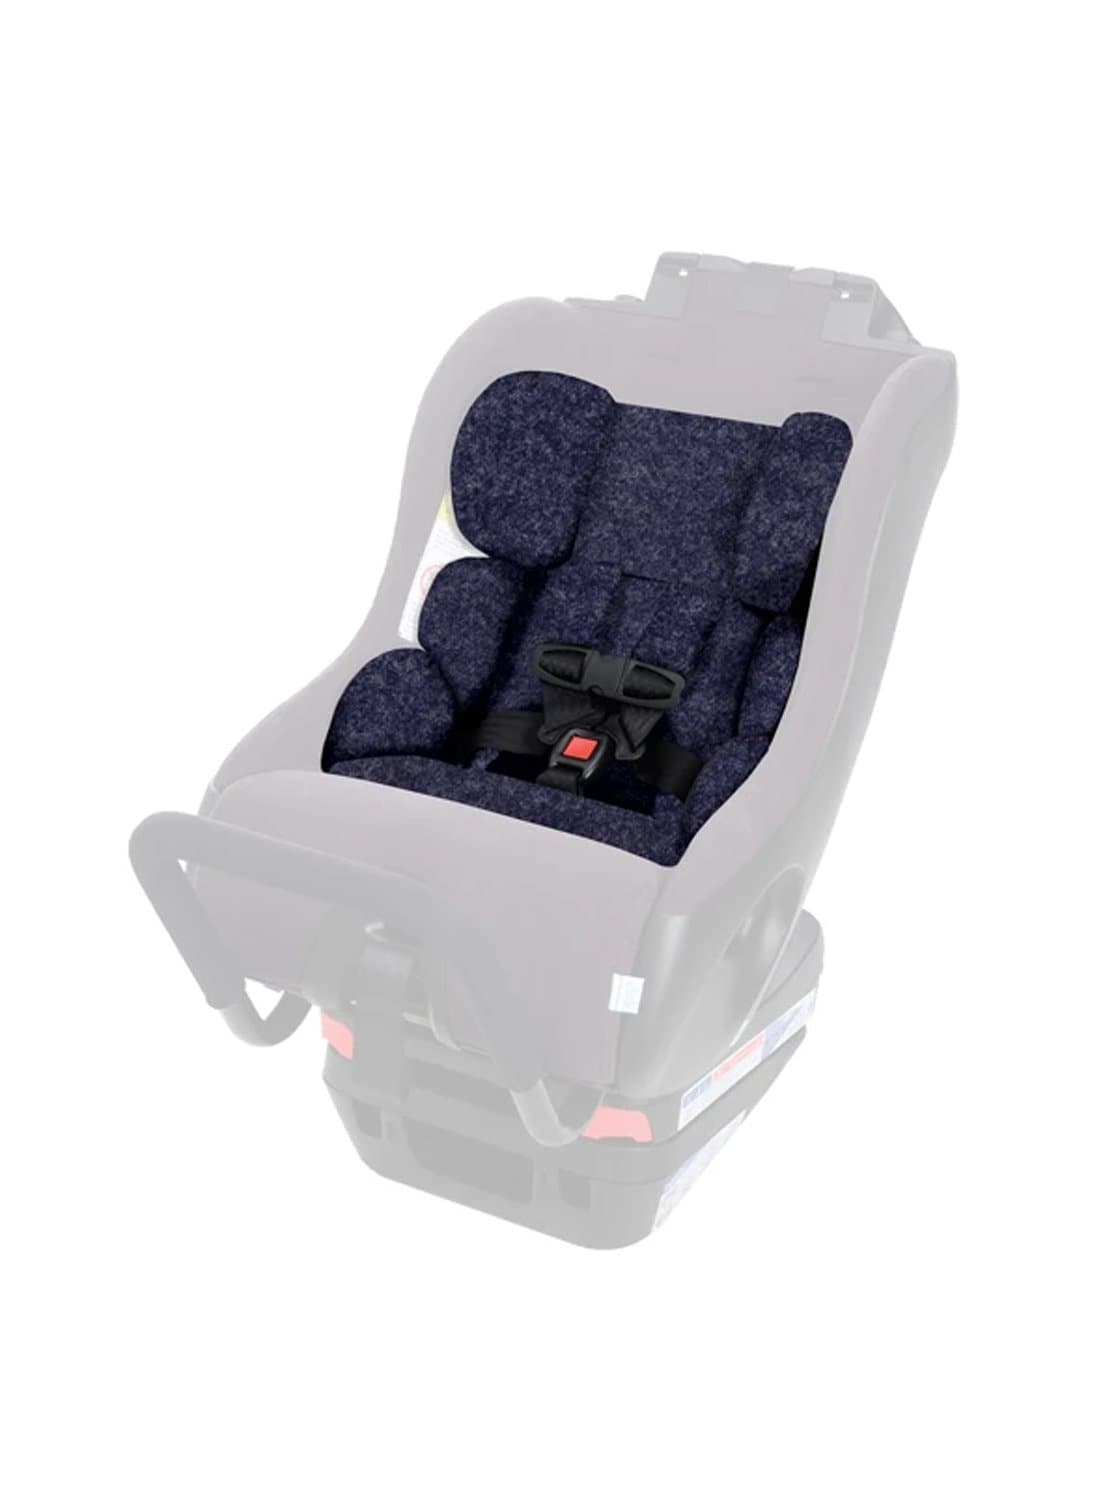 CLEK Infant-Thingy Insert For Foonf / Fllo - ANB Baby -$50 - $75